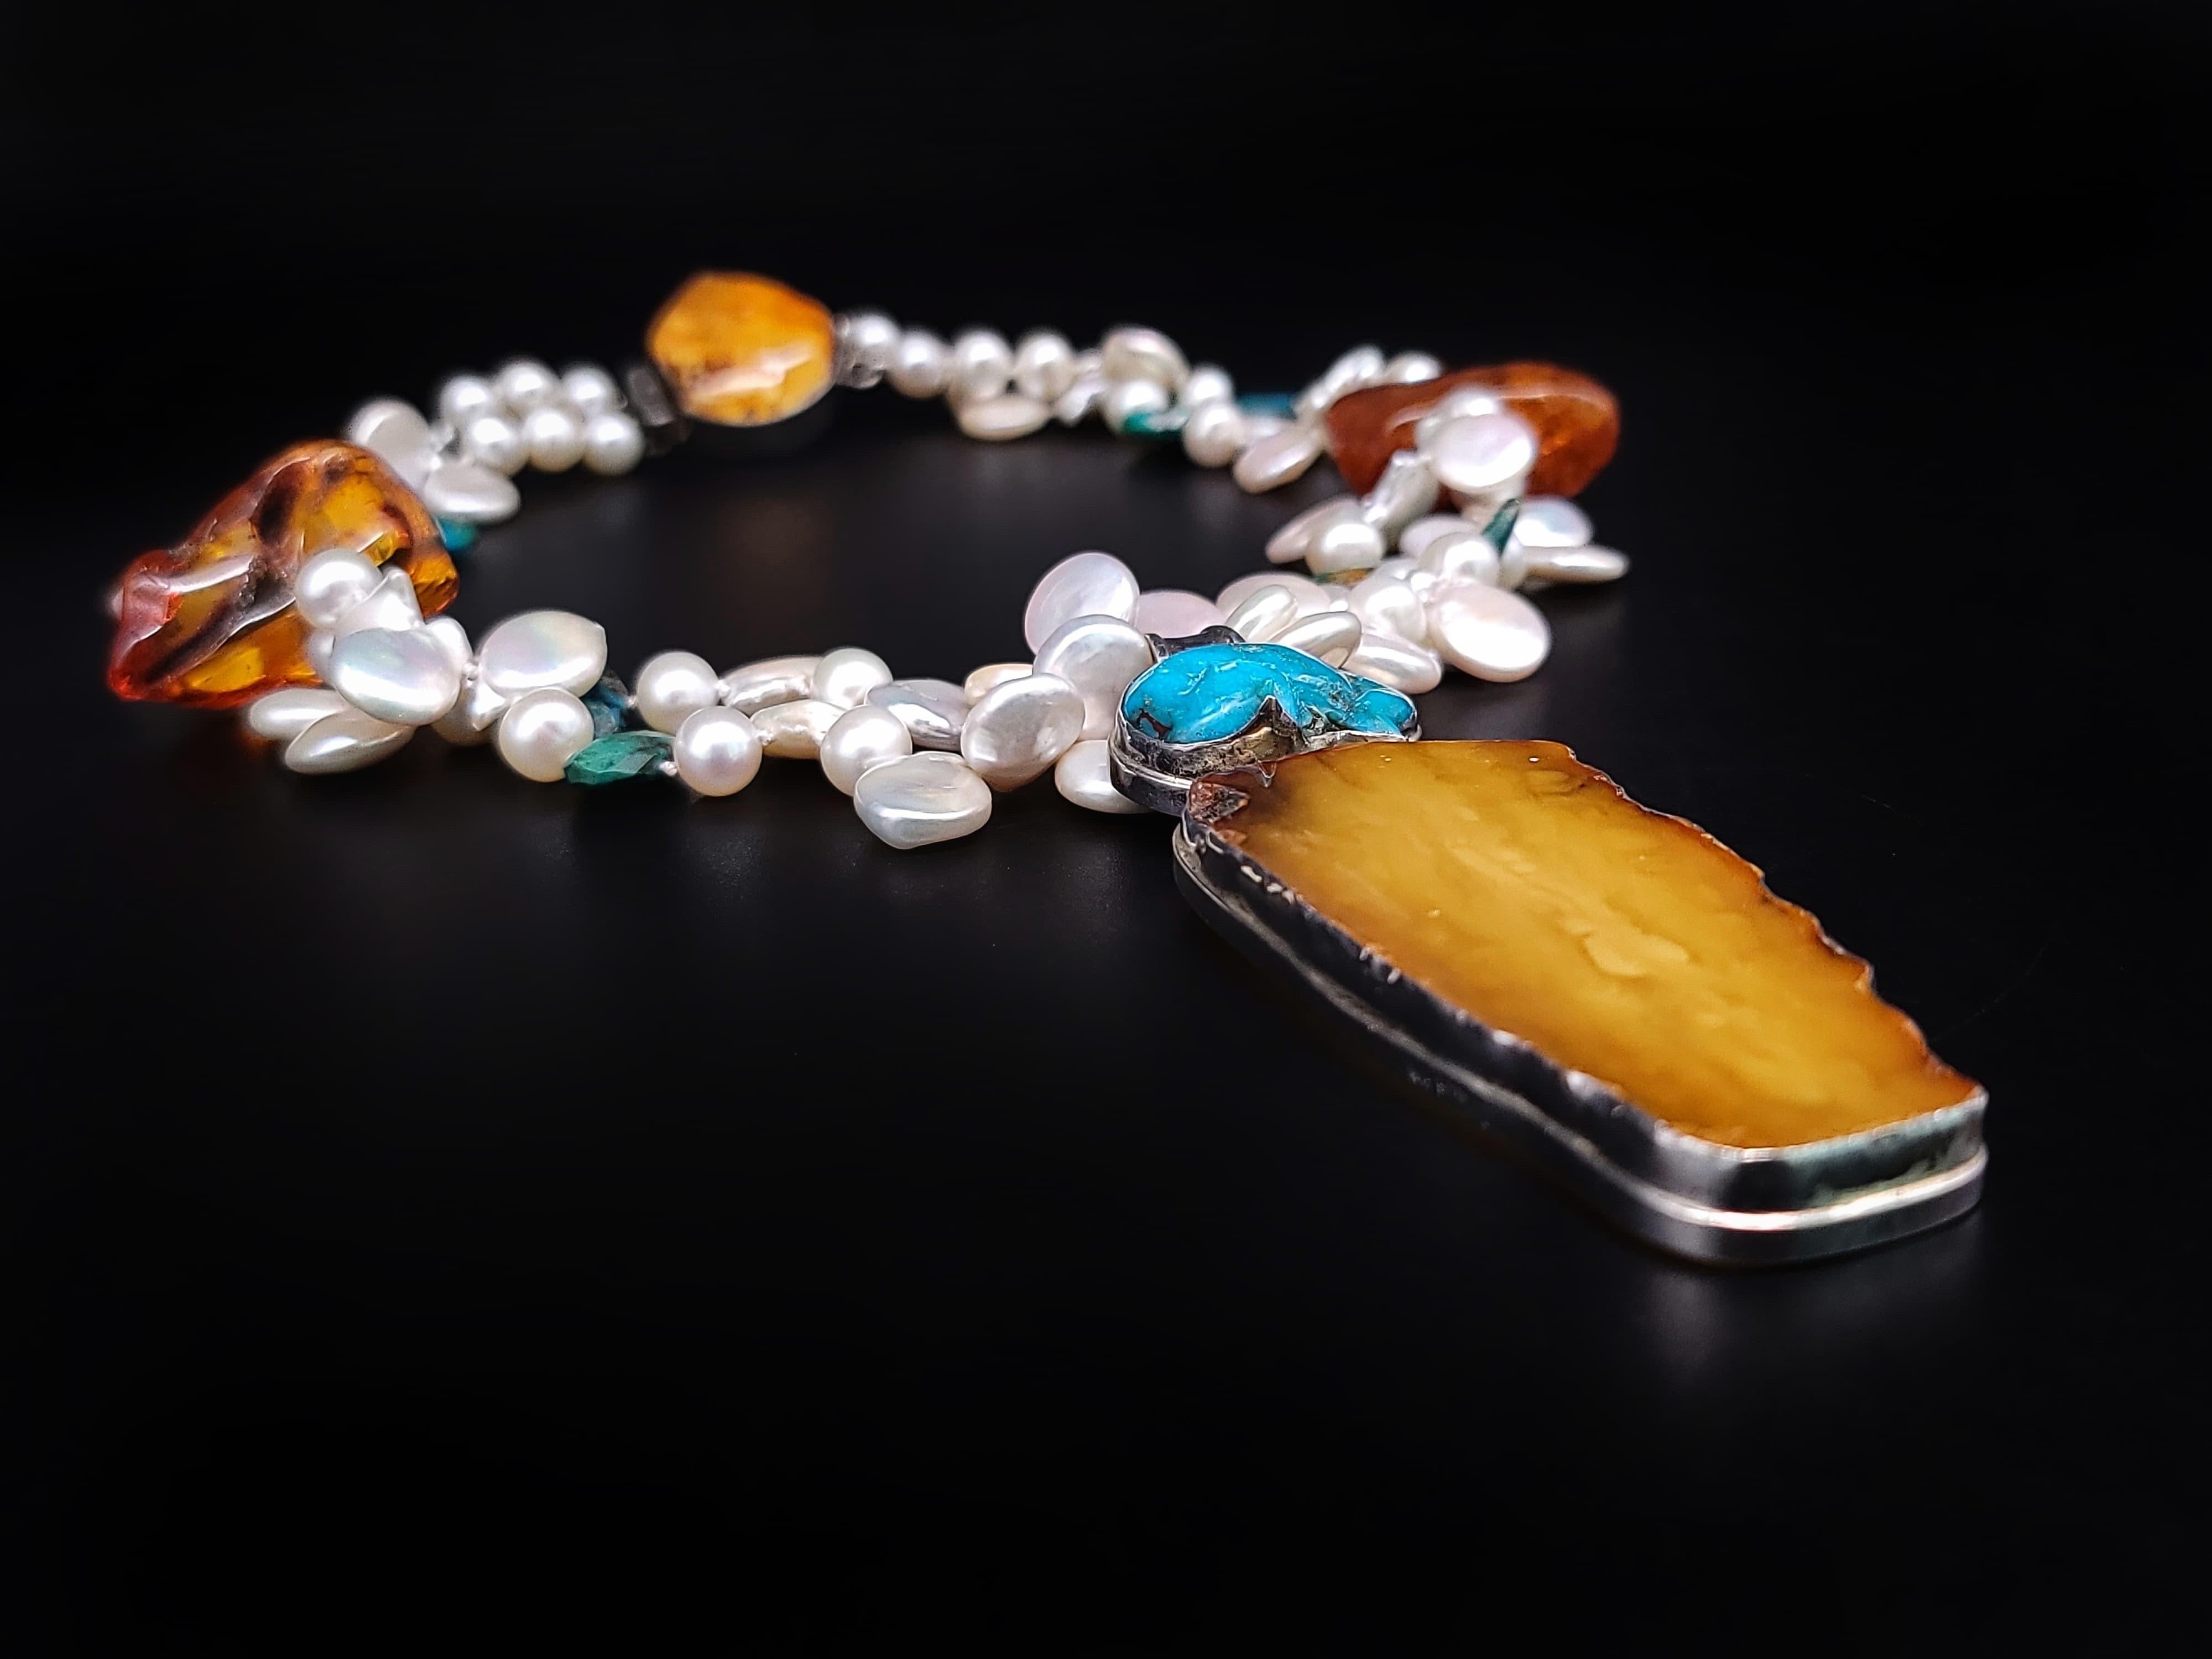 Mixed Cut A.Jeschel Pearl necklace with spectacular Amber pendant. For Sale